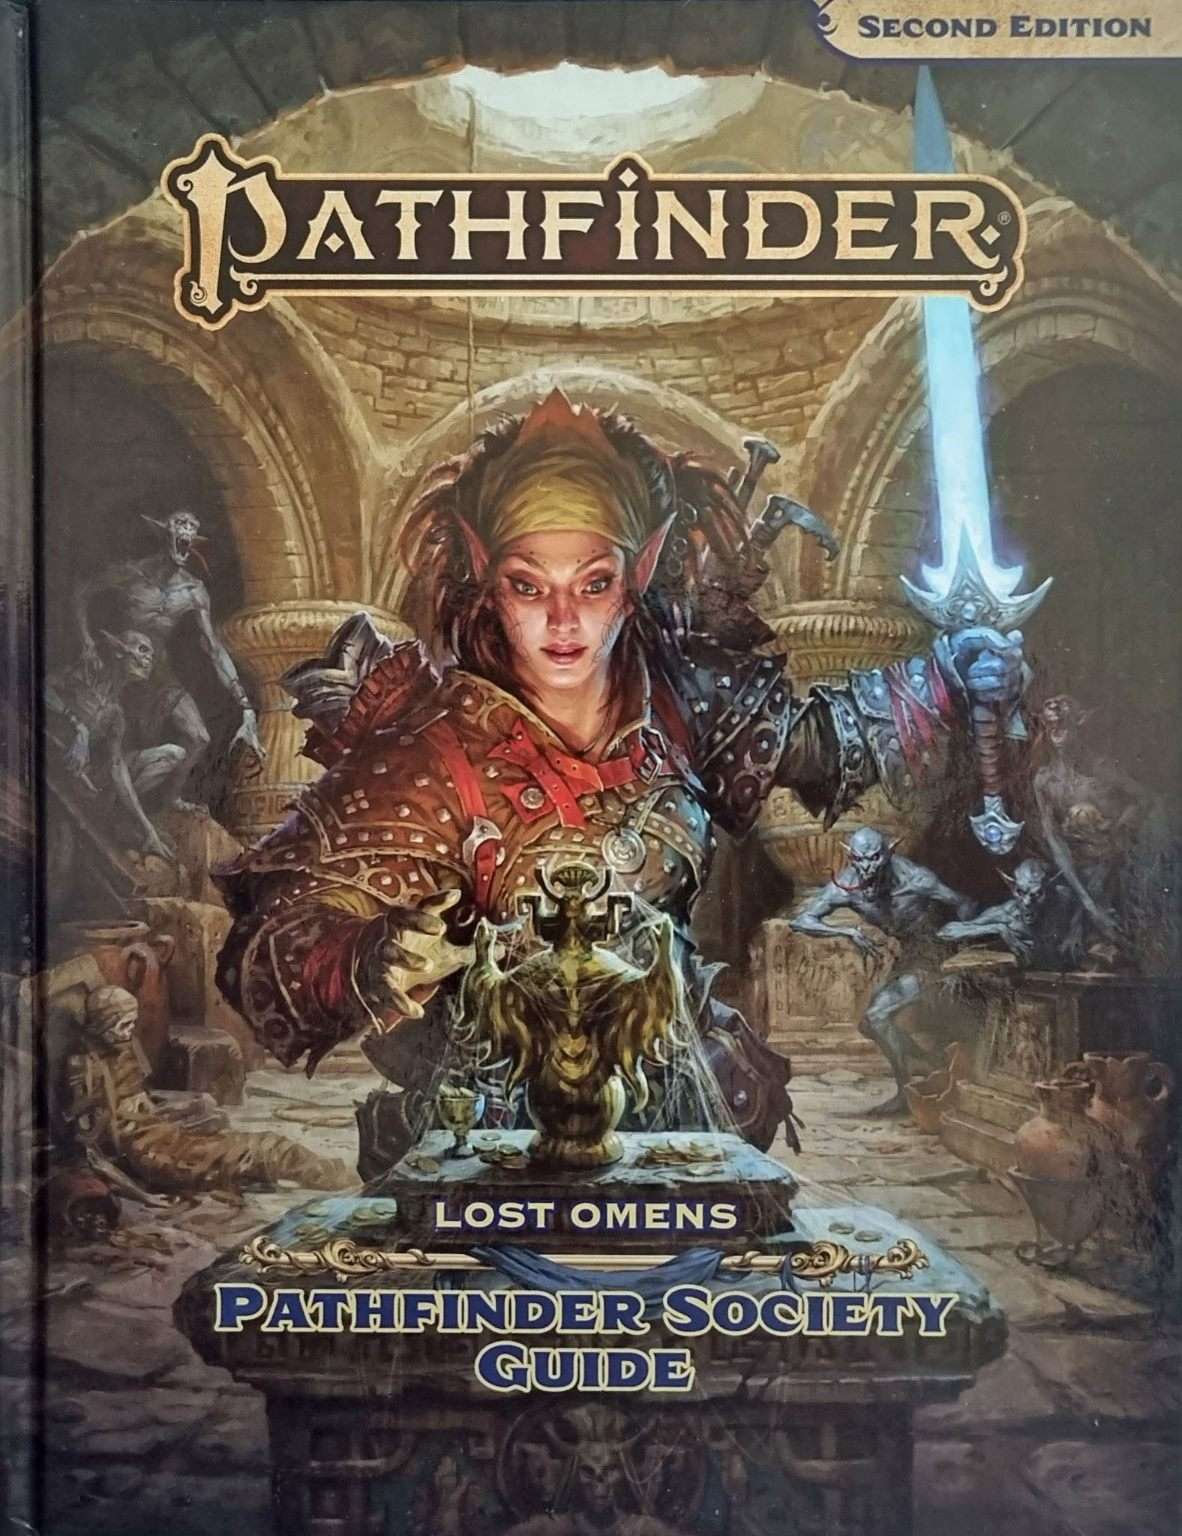 Pathfinder: Lost Omens - Pathfinder Society Guide - Second Edition (2e)